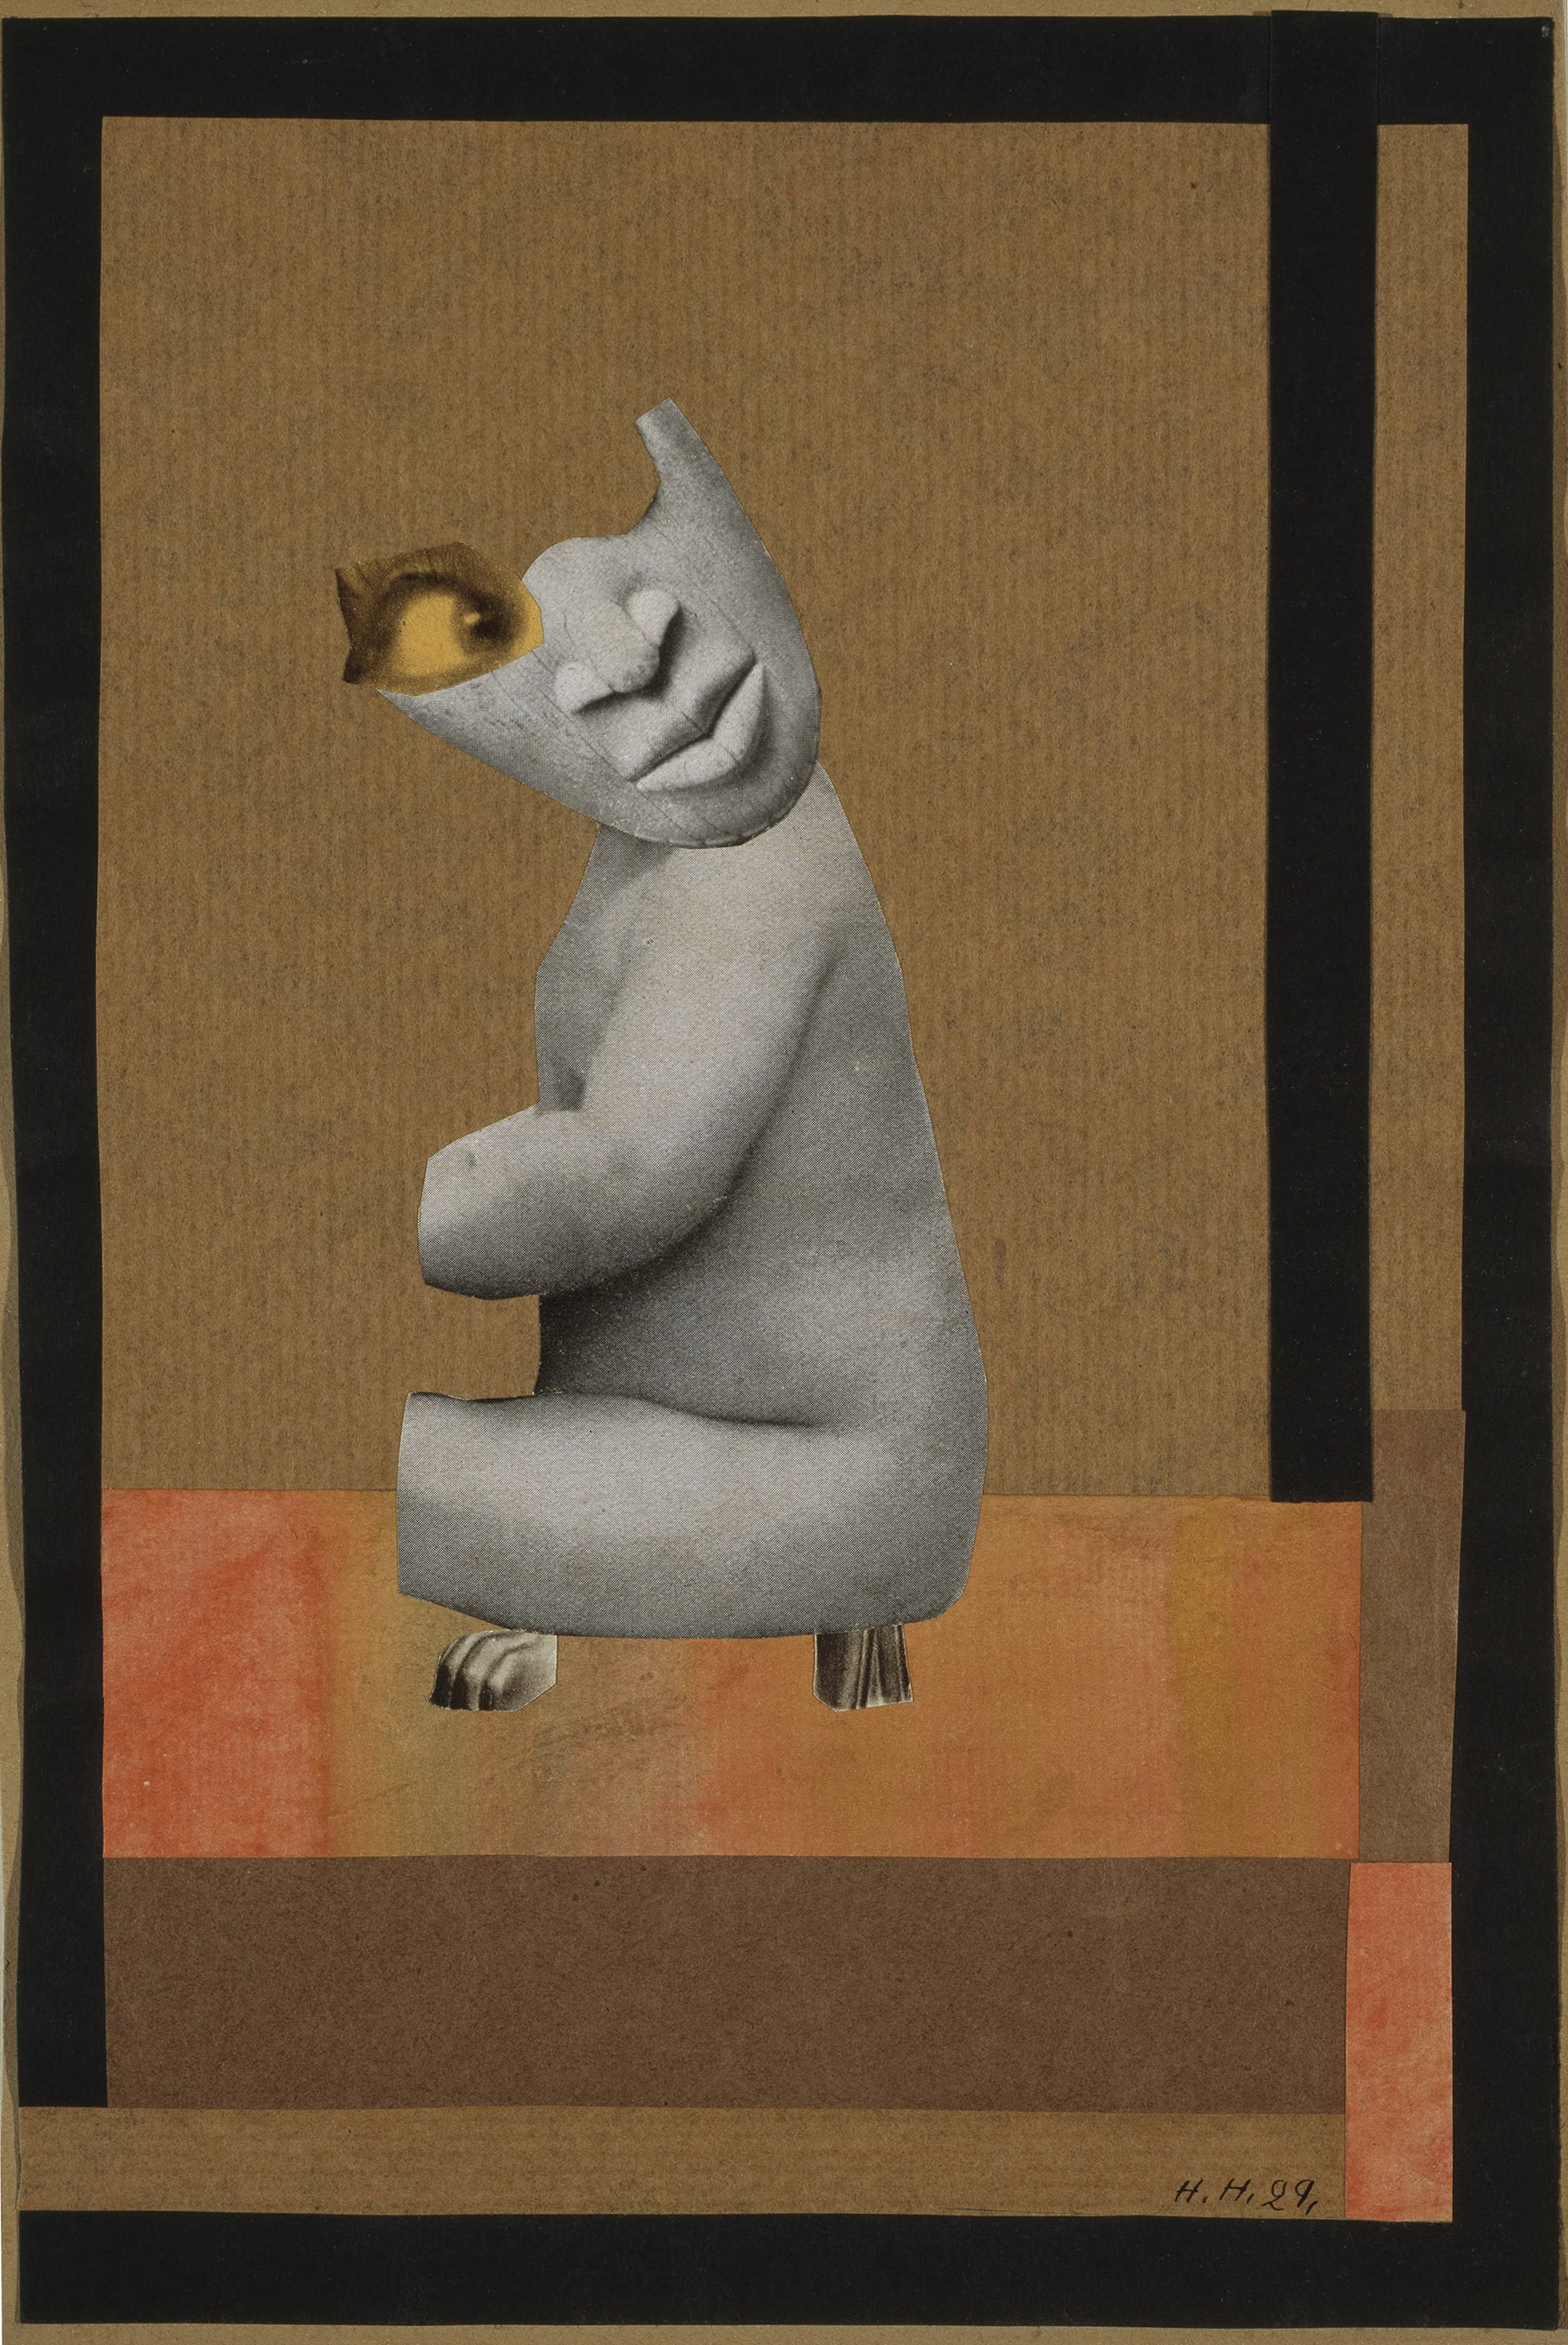 Untitled, from an Ethnographic Museum, Hannah Höch